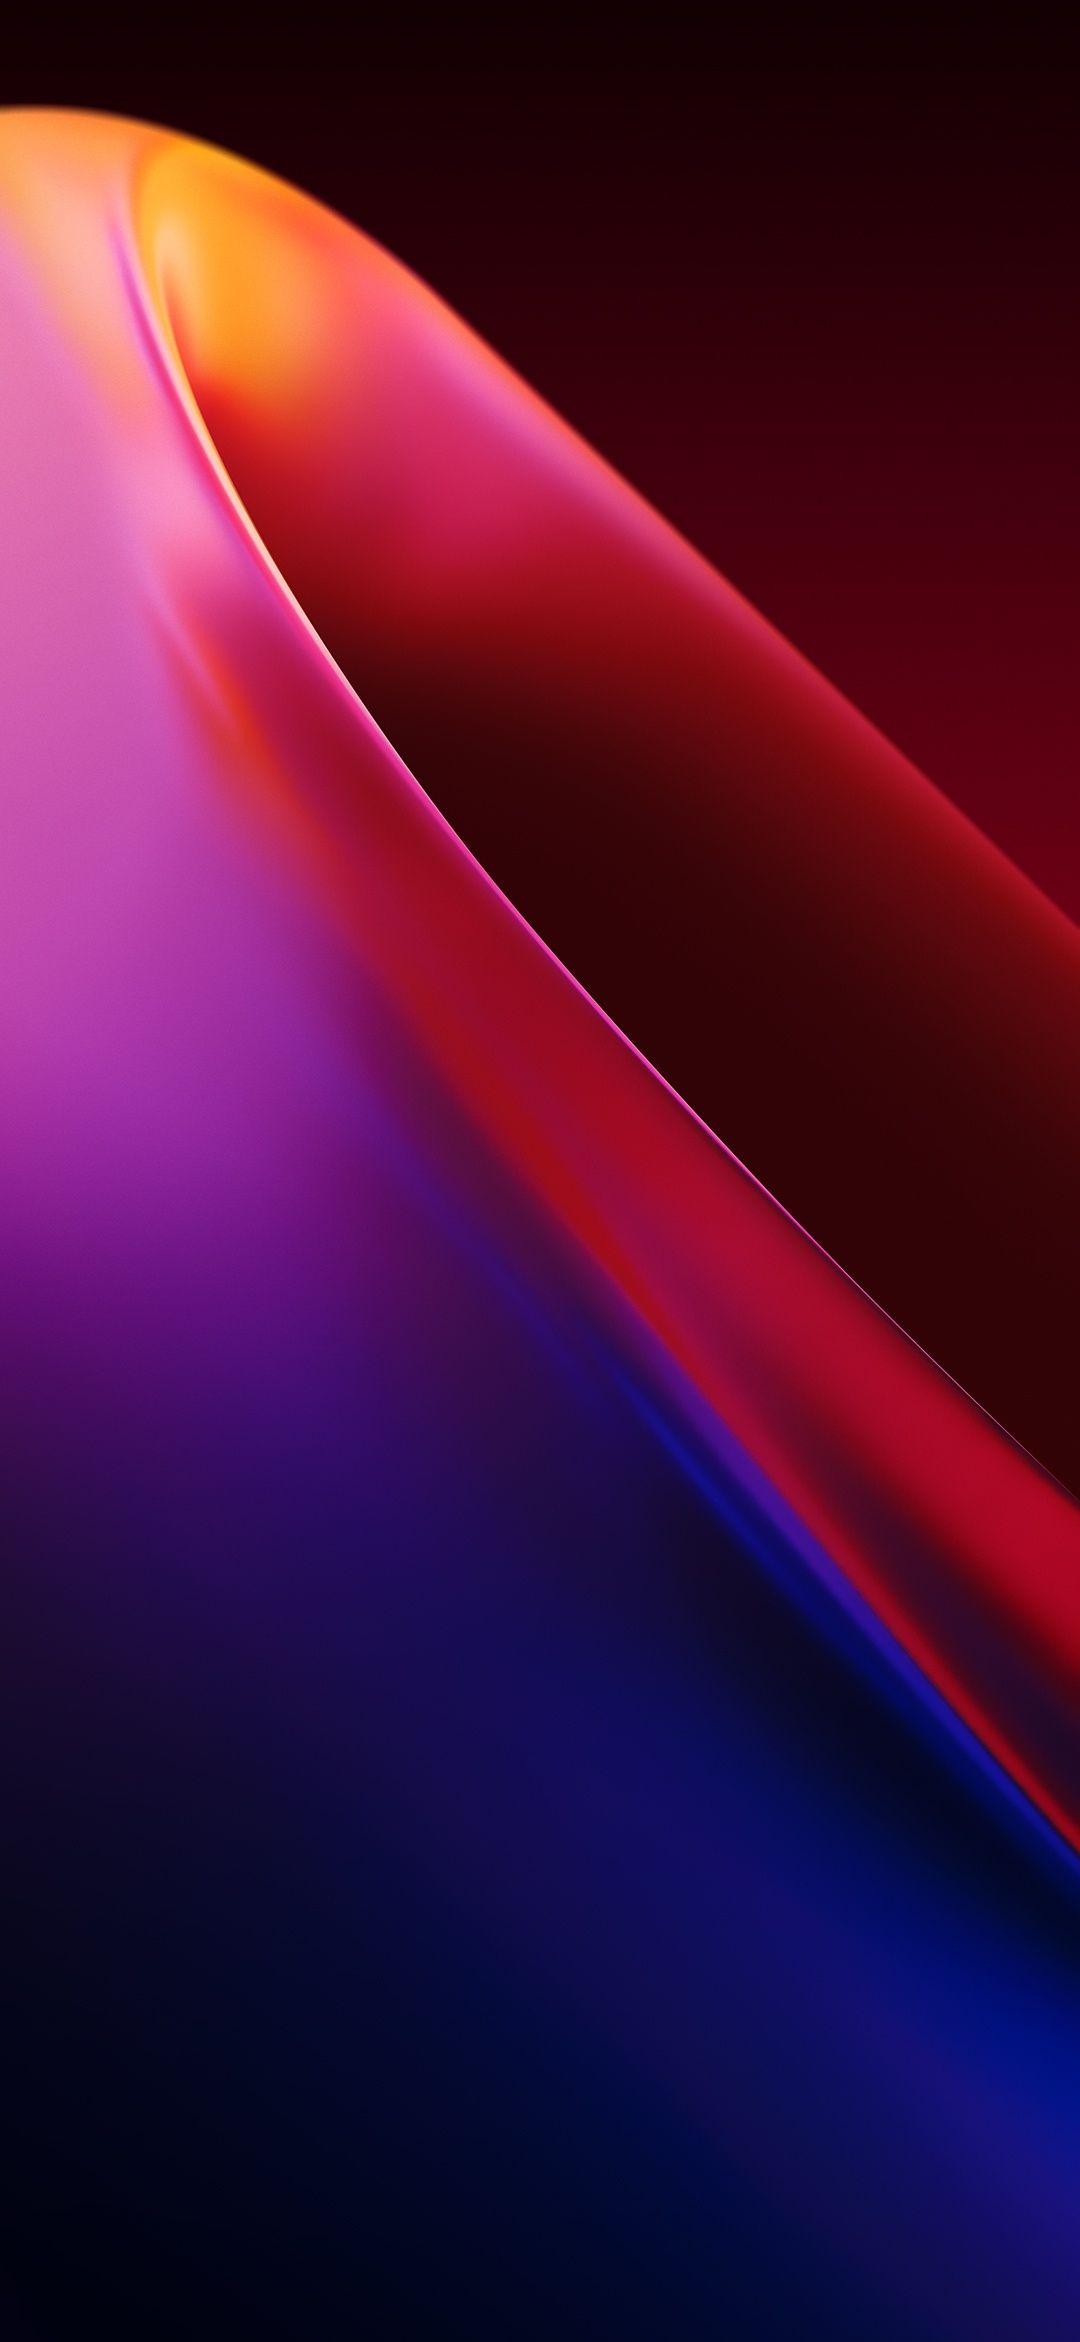 Download OnePlus 7T Official Wallpaper Here! Full HD Resolution